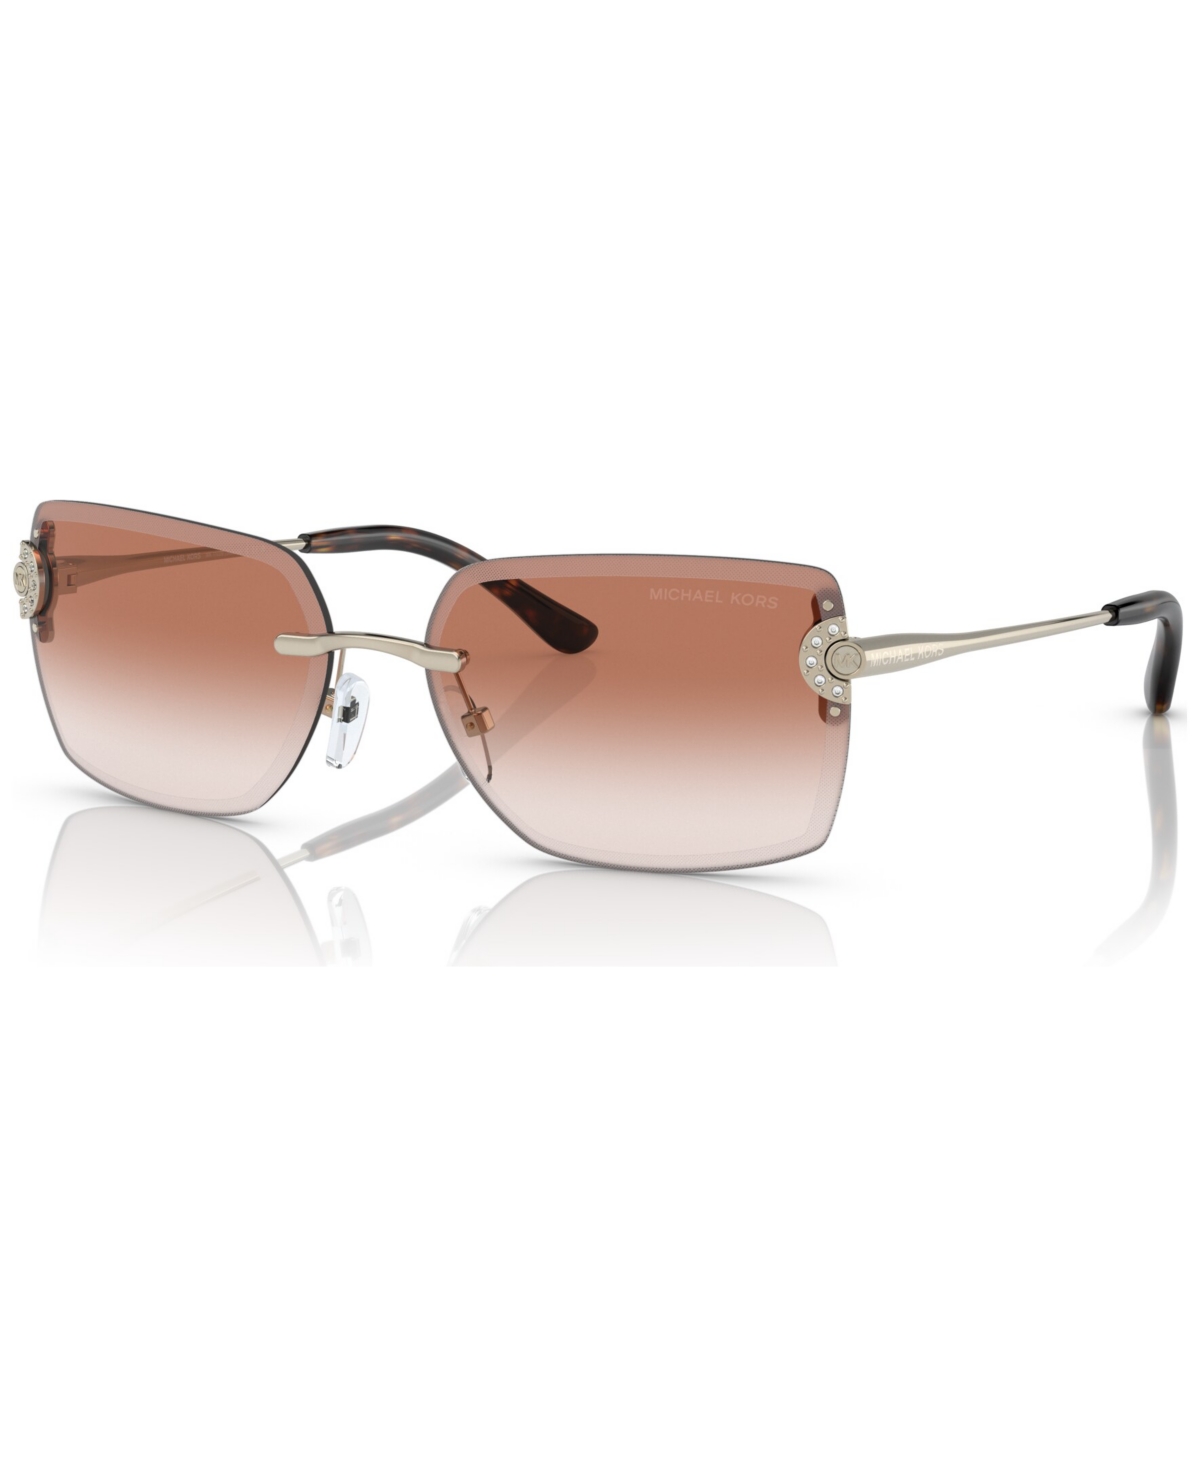 Michael Kors Sedona Women's Sunglasses, Mk1122, Exclusively Ours In Rose Gold-tone